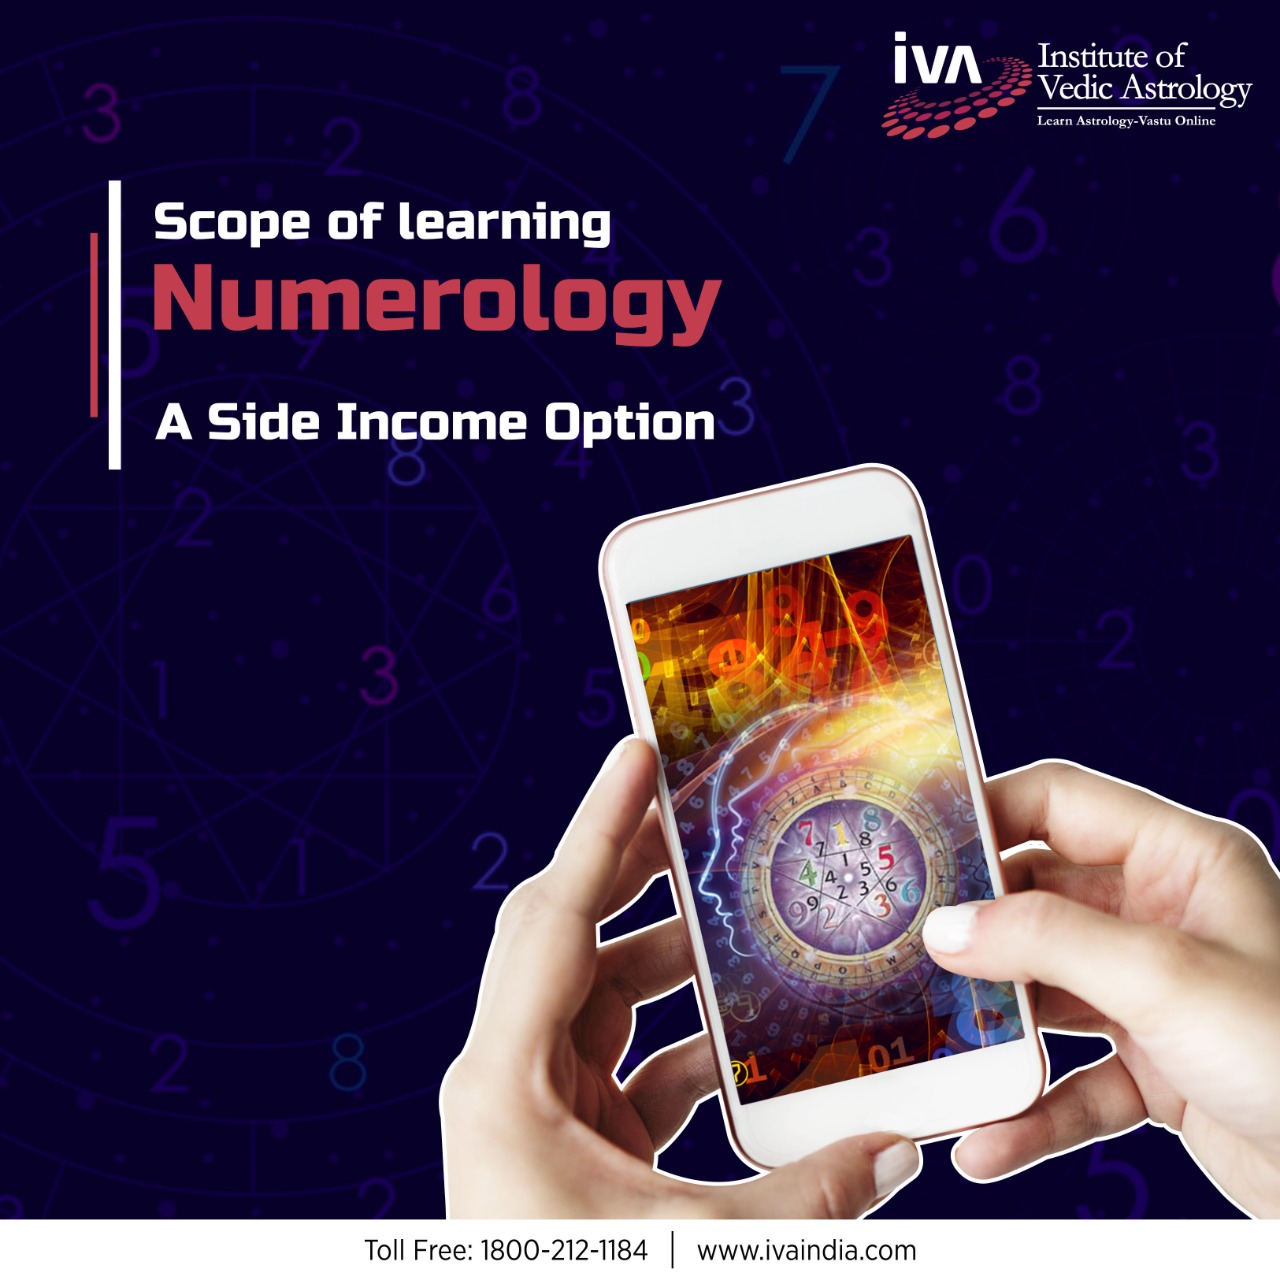 Scope of learning Numerology - A Side Income Option